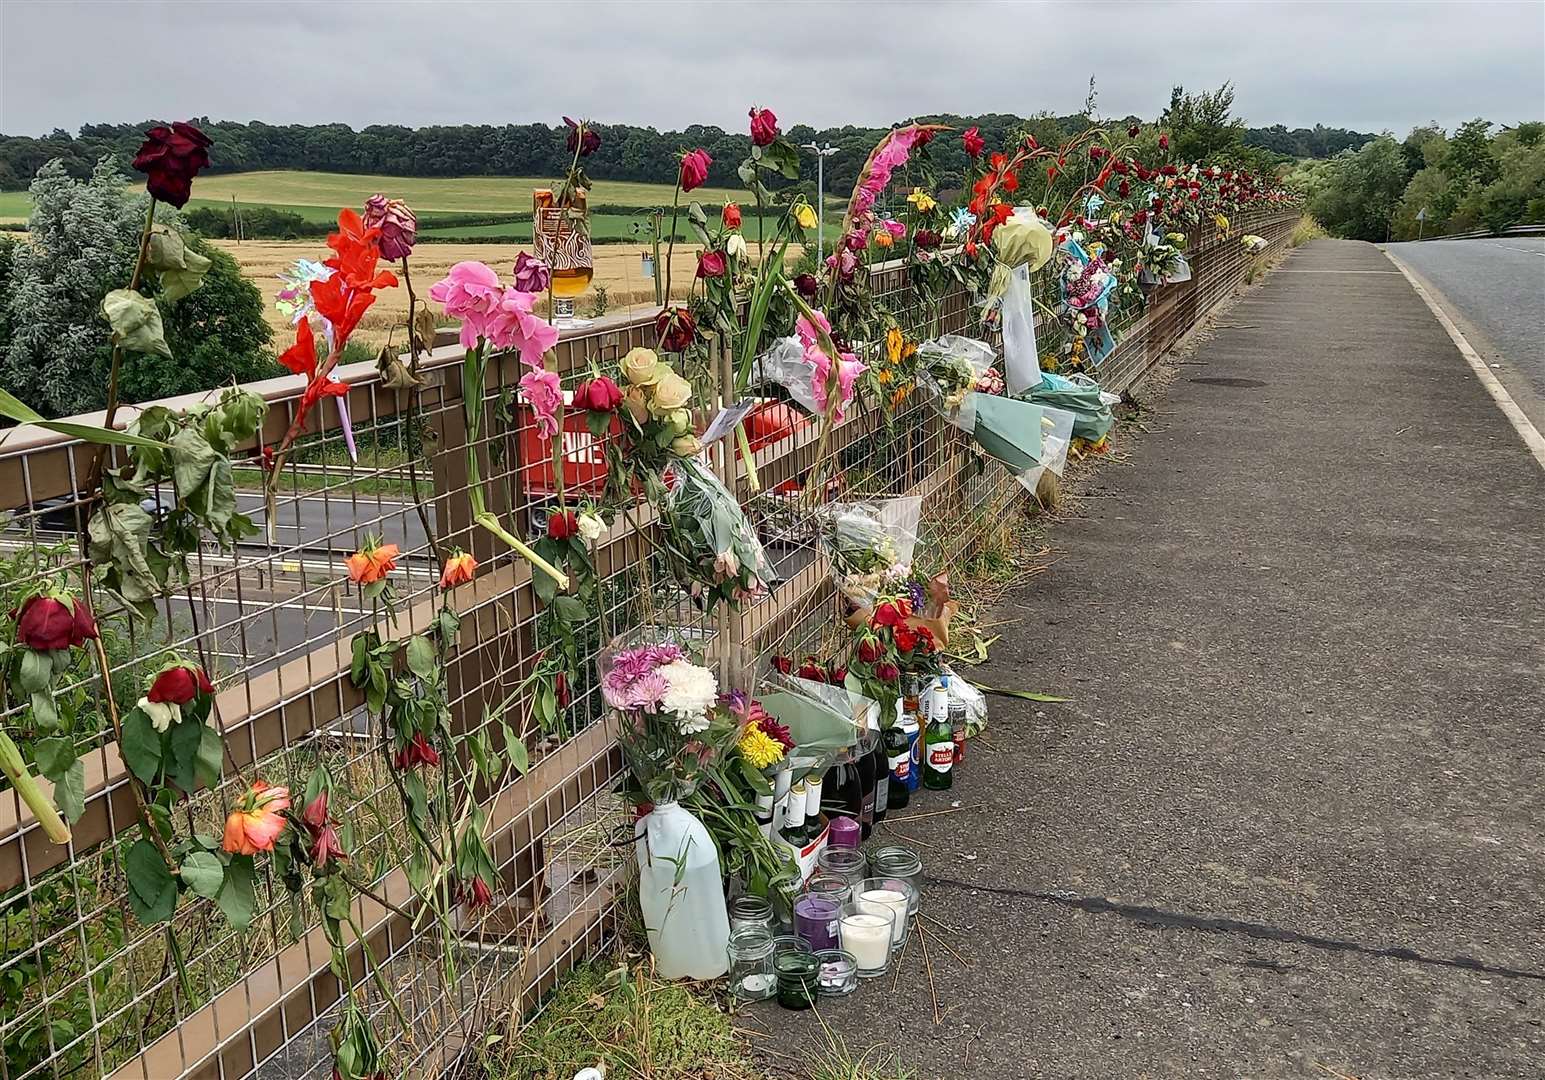 Floral tributes have been left on the Bullockstone Road bridge where Lee Harlow died